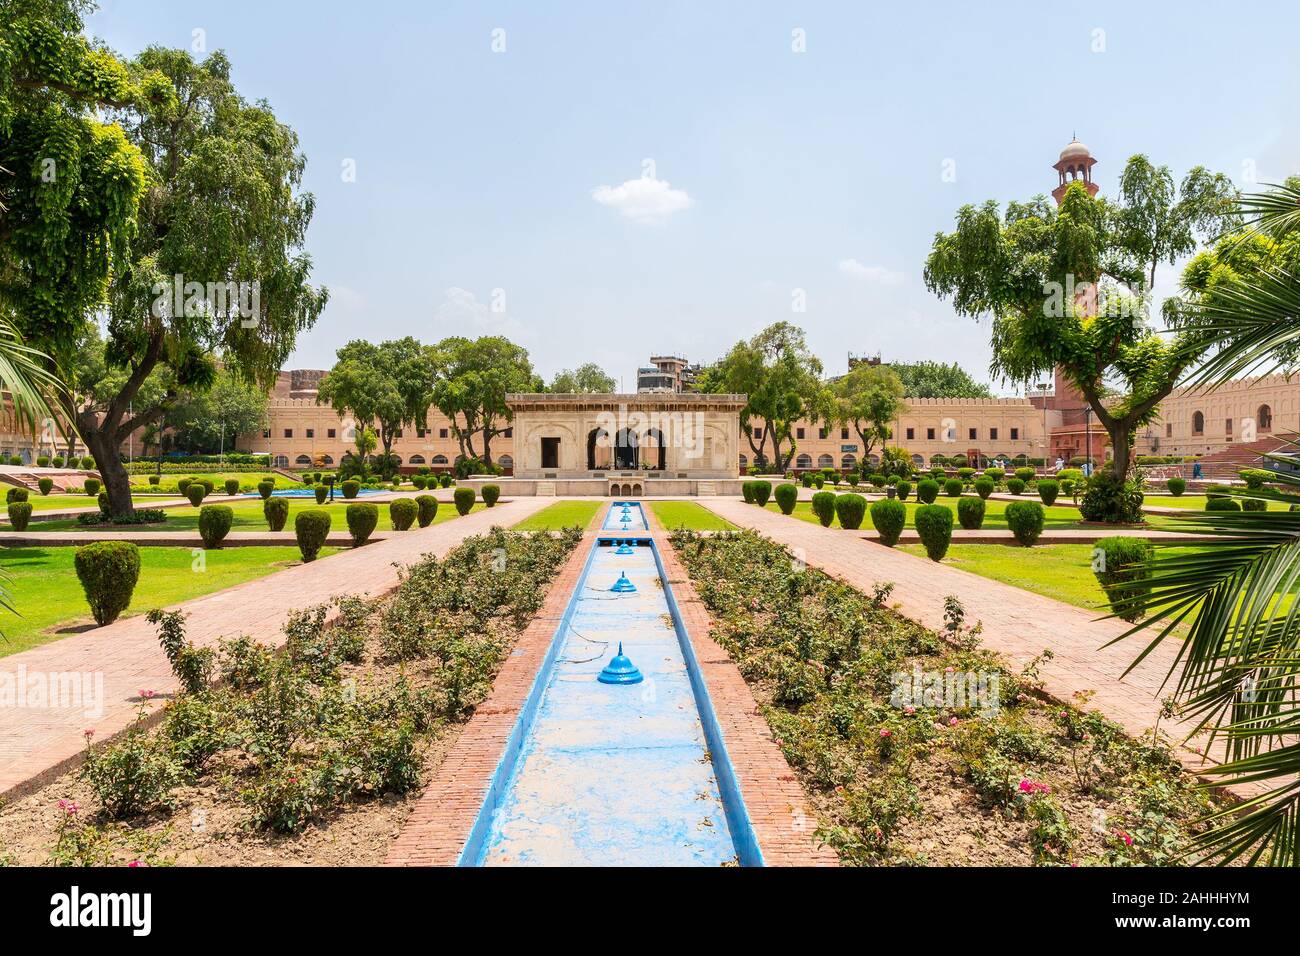 Lahore Fort Picturesque Breathtaking View of Hazuri Bagh Park at Alamgiri Gate on a Sunny Blue Sky Day Stock Photo